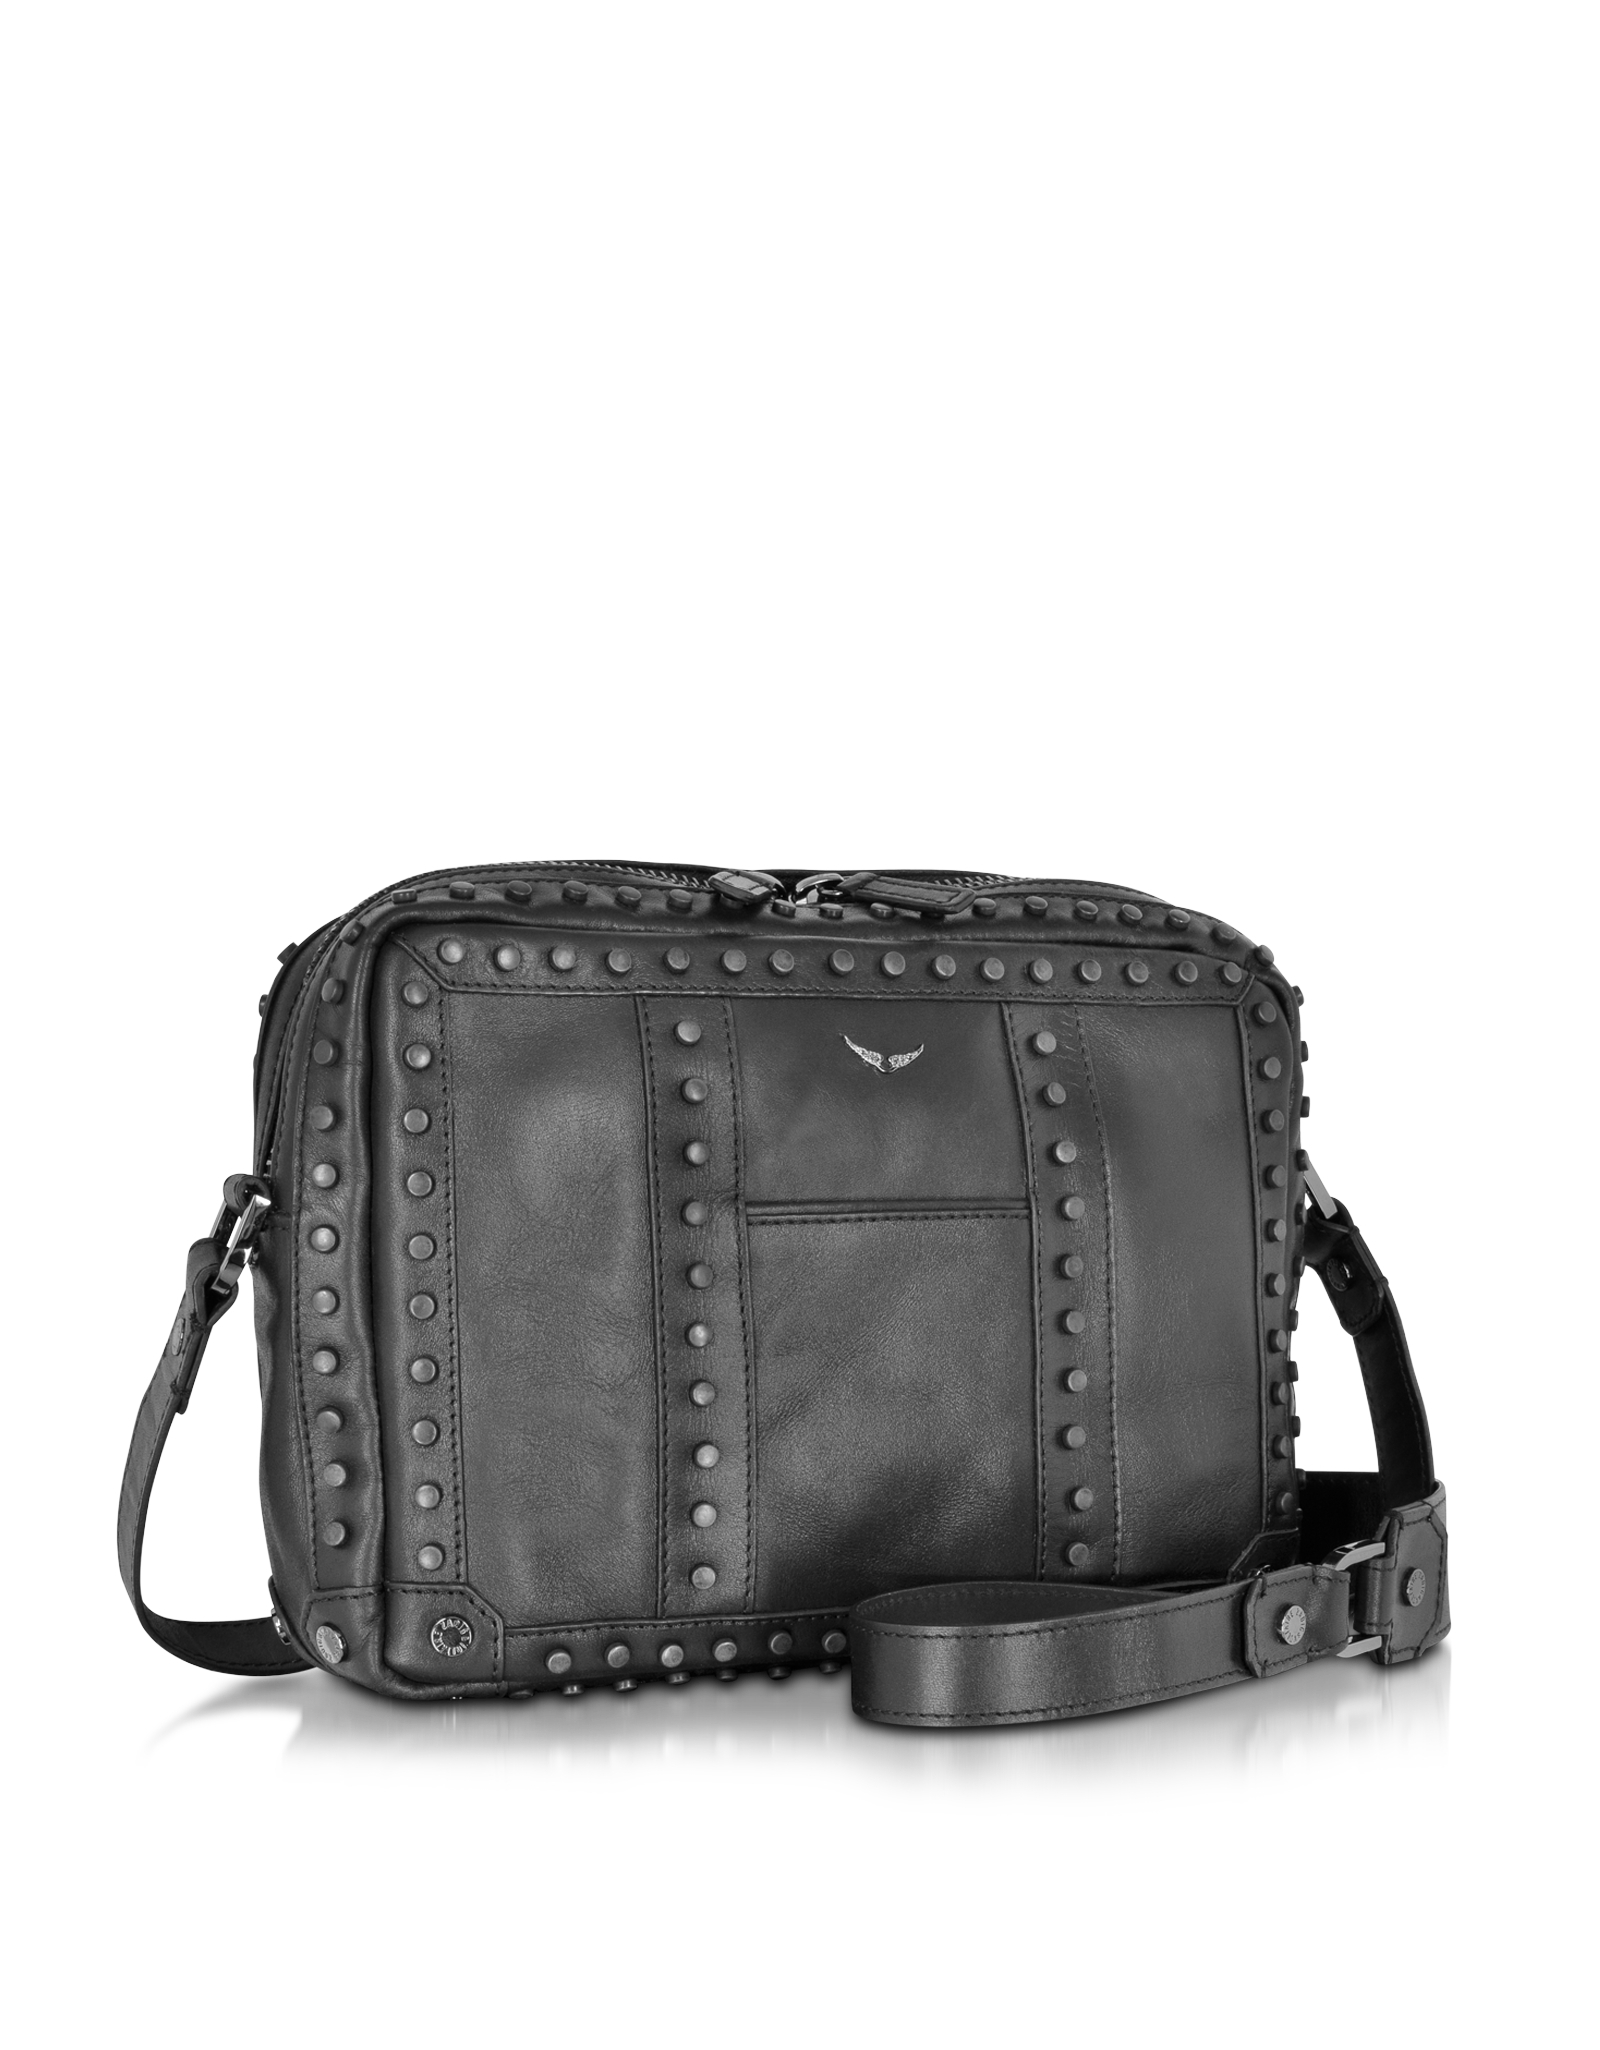 Zadig & Voltaire Boxy Black Leather Crossbody Bag - Lyst